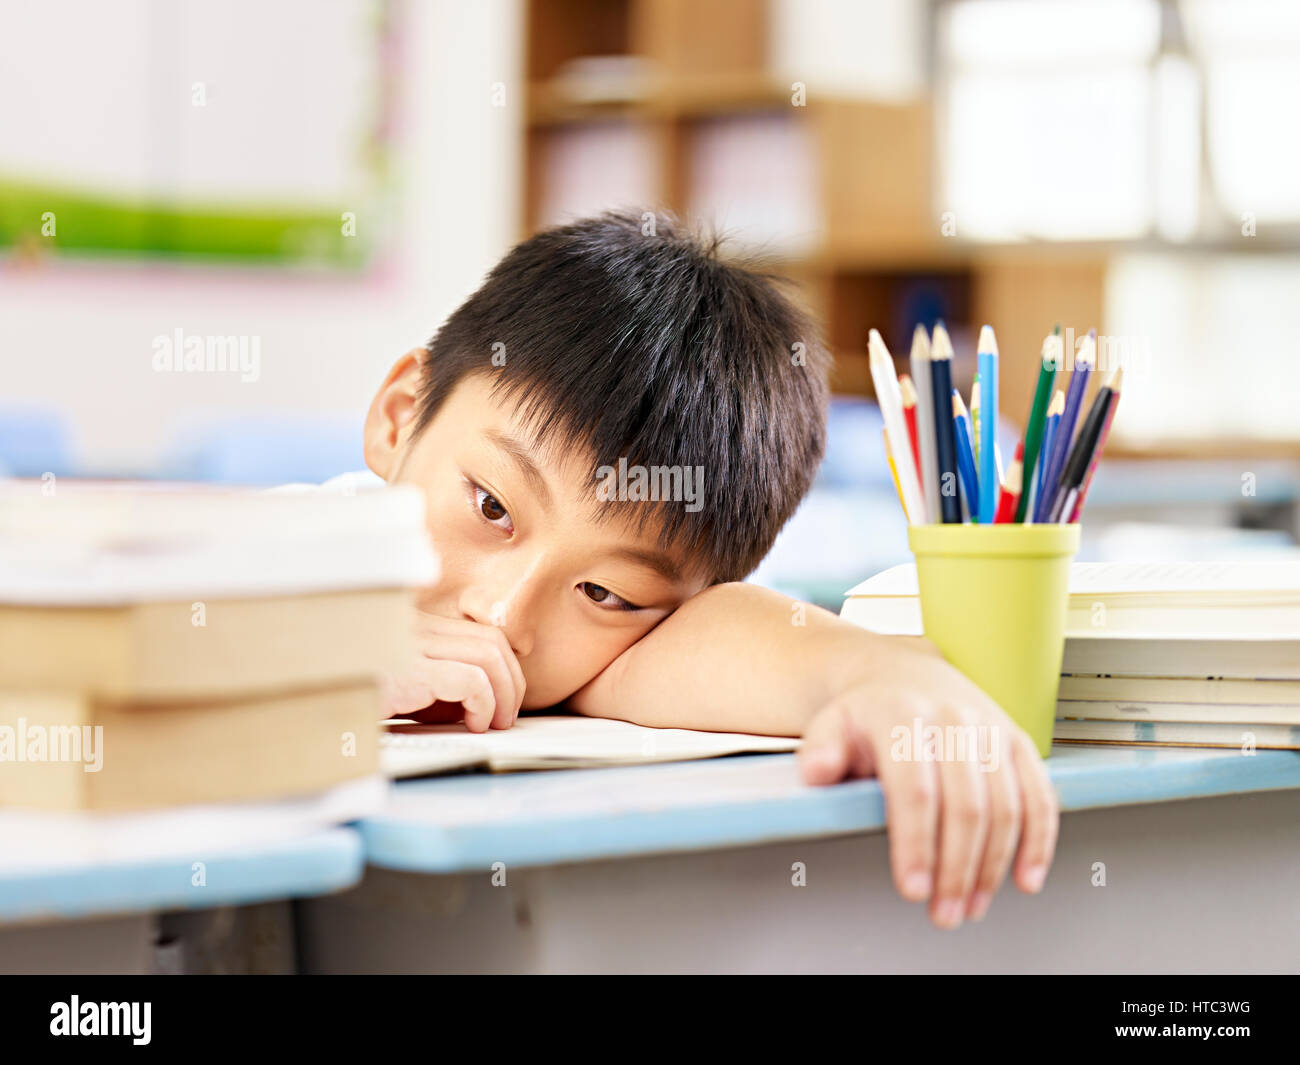 asian elementary schoolboy looking tired and exhausted resting his head on desk in classroom. Stock Photo